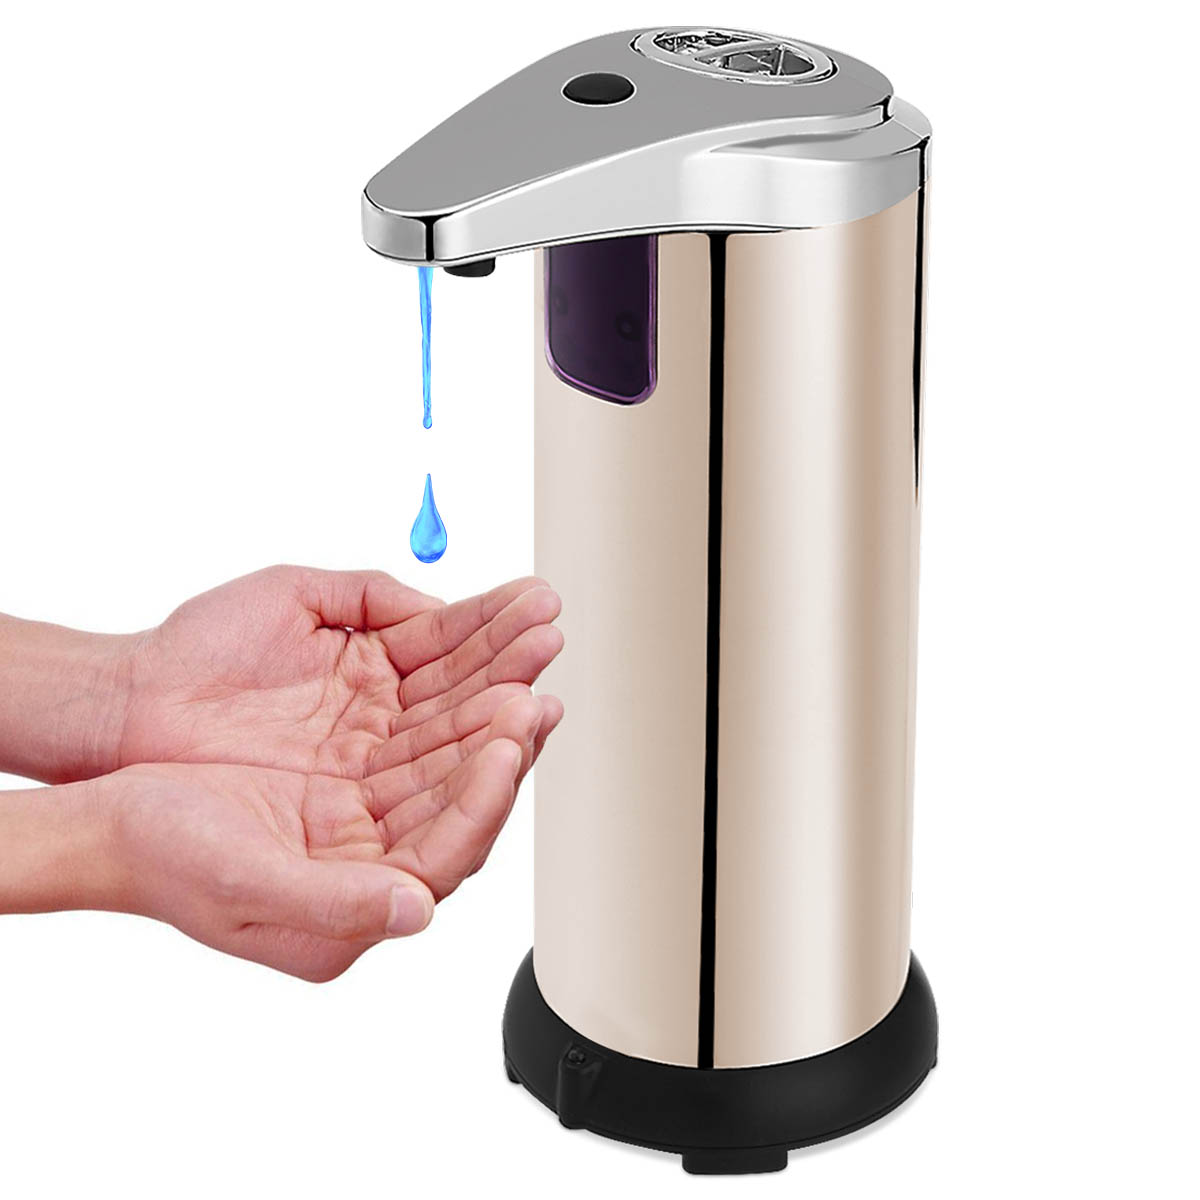 

Stainless Steel Hands Free Automatic IR Sensor Touchless Soap Liquid